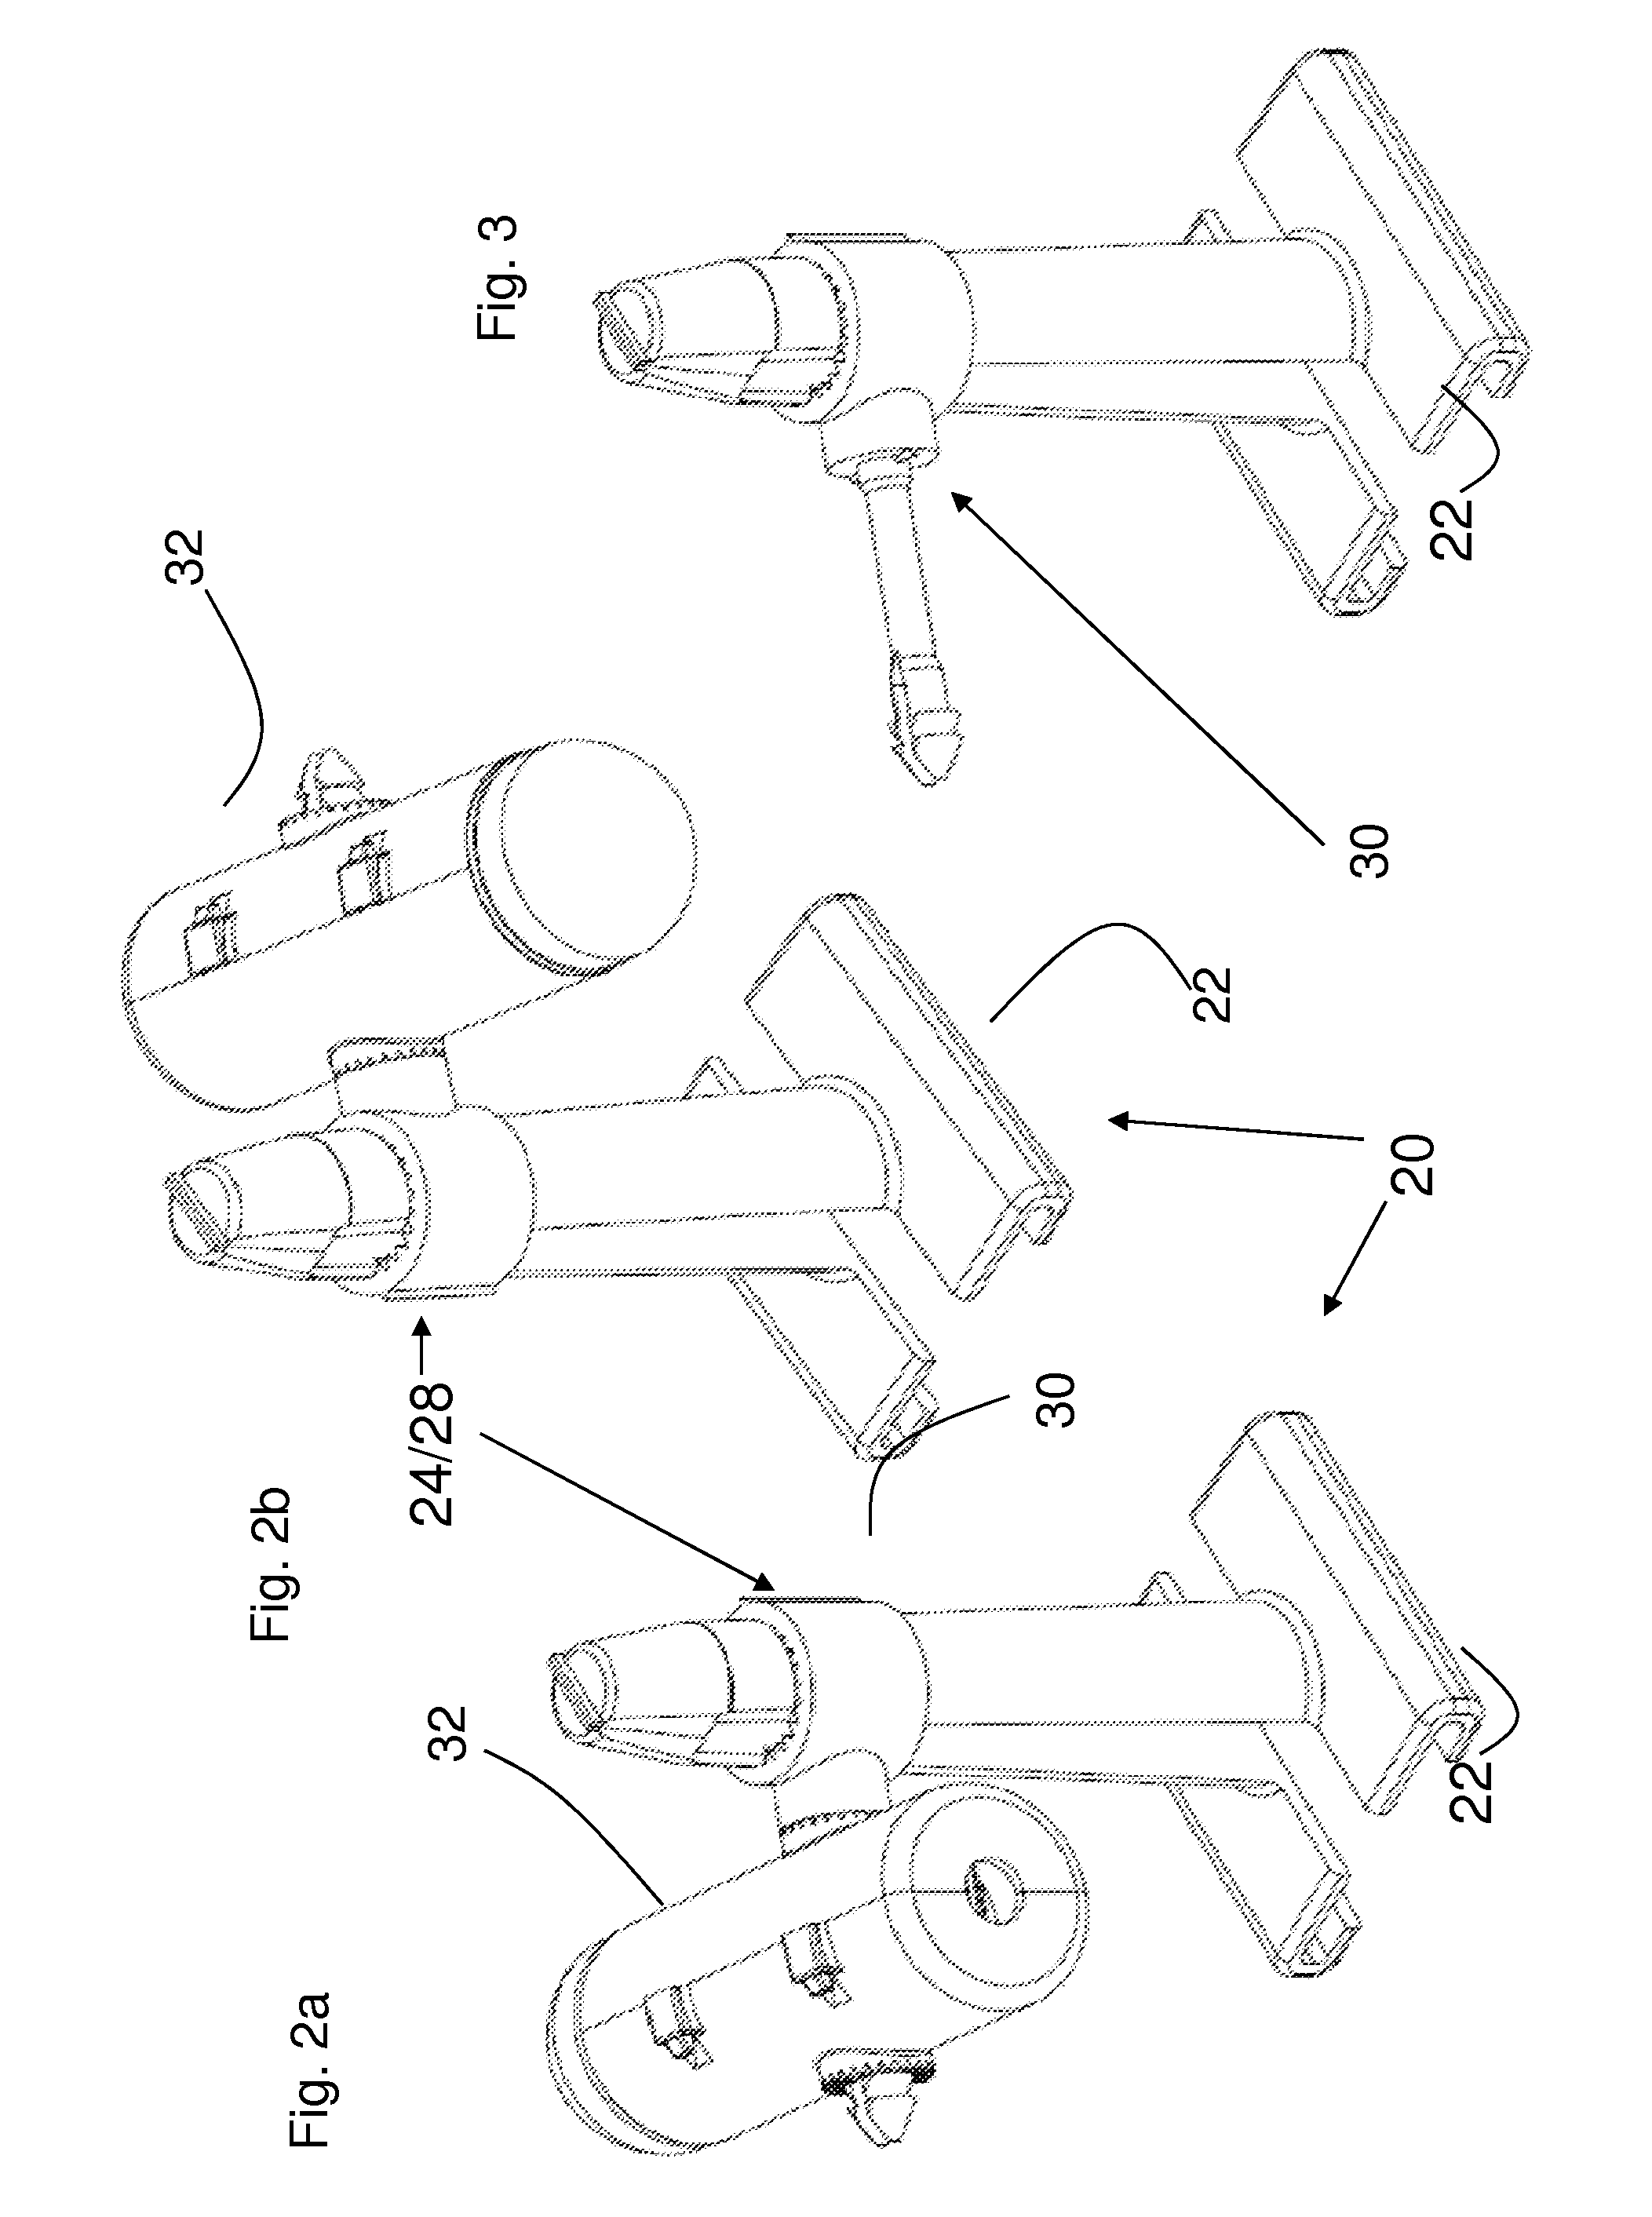 Automation device and systems packaging and packaging methods for energy management and other applications